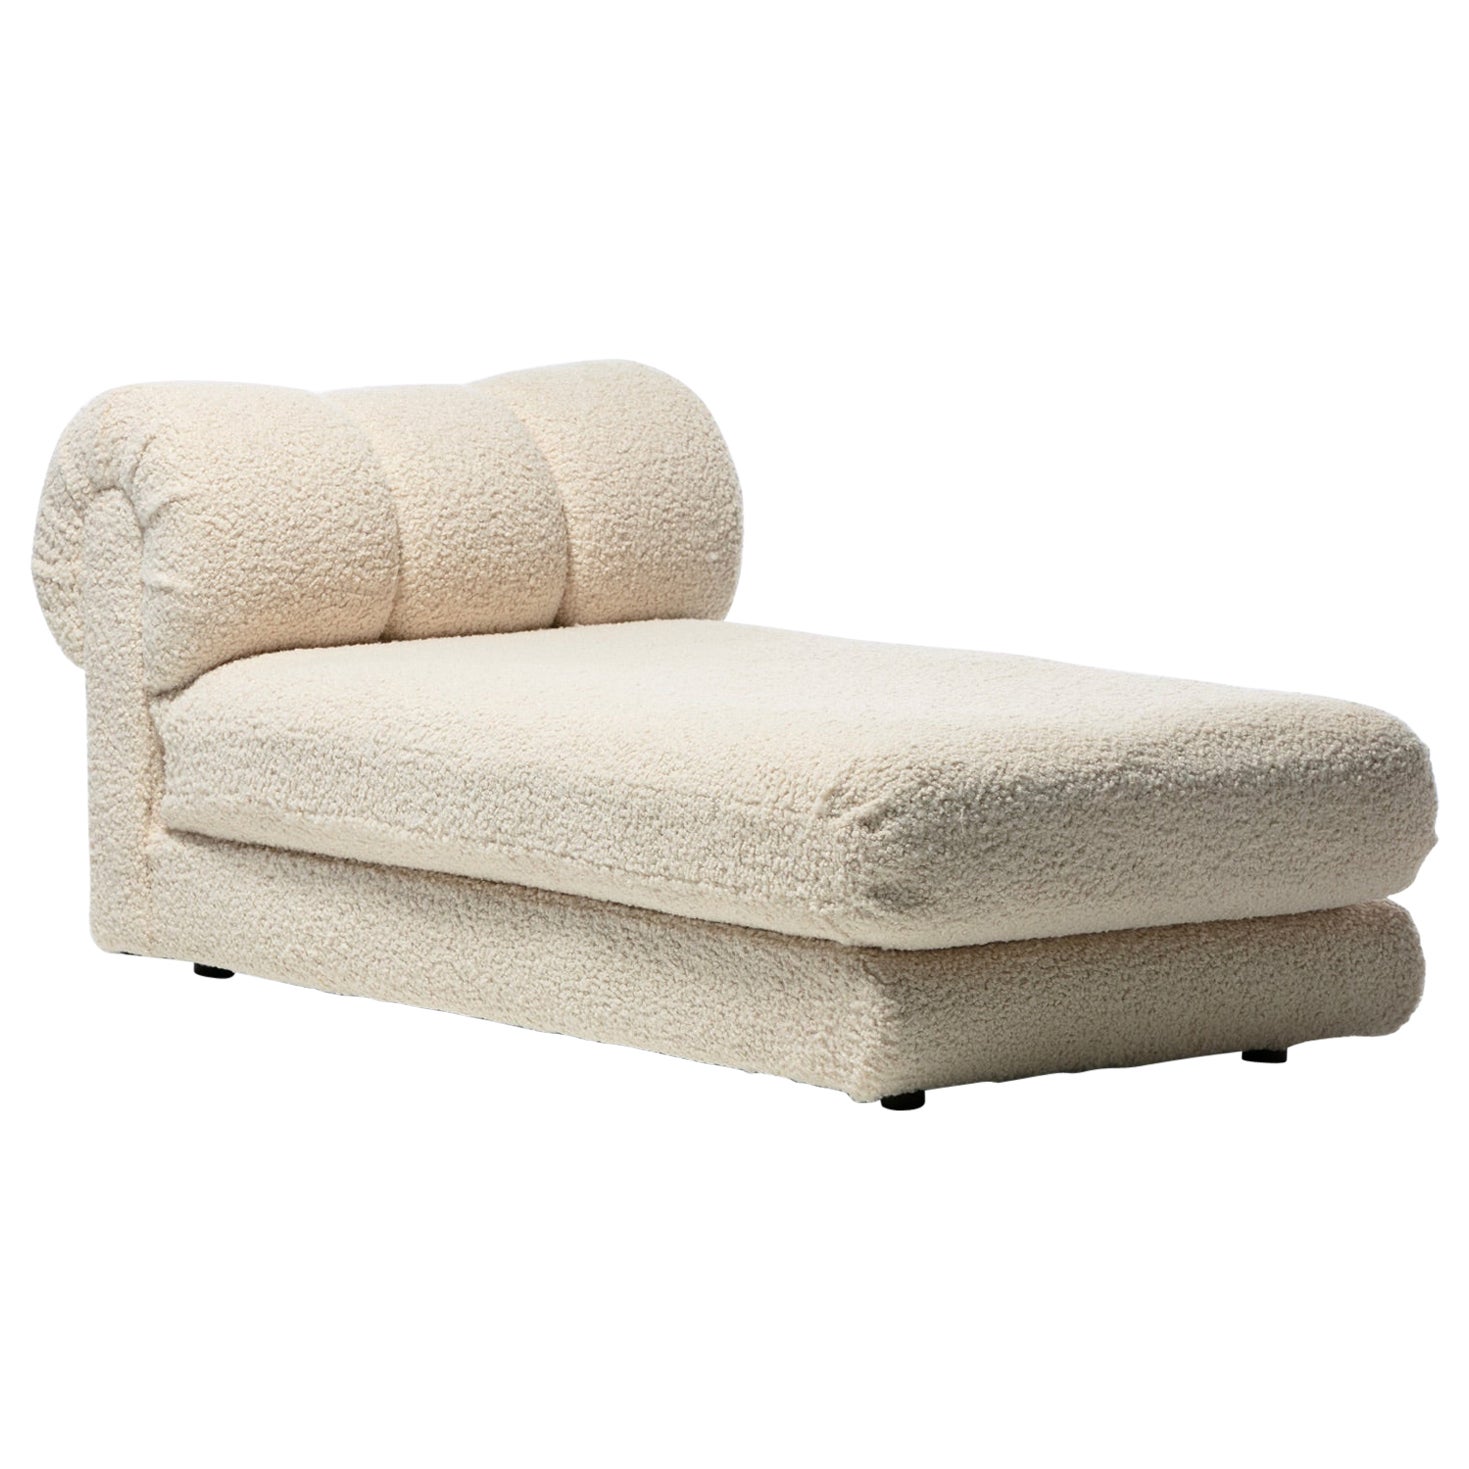 Steve Chase Style Post Modern Chaise Lounge in Soft Ivory White Bouclé c. 1985